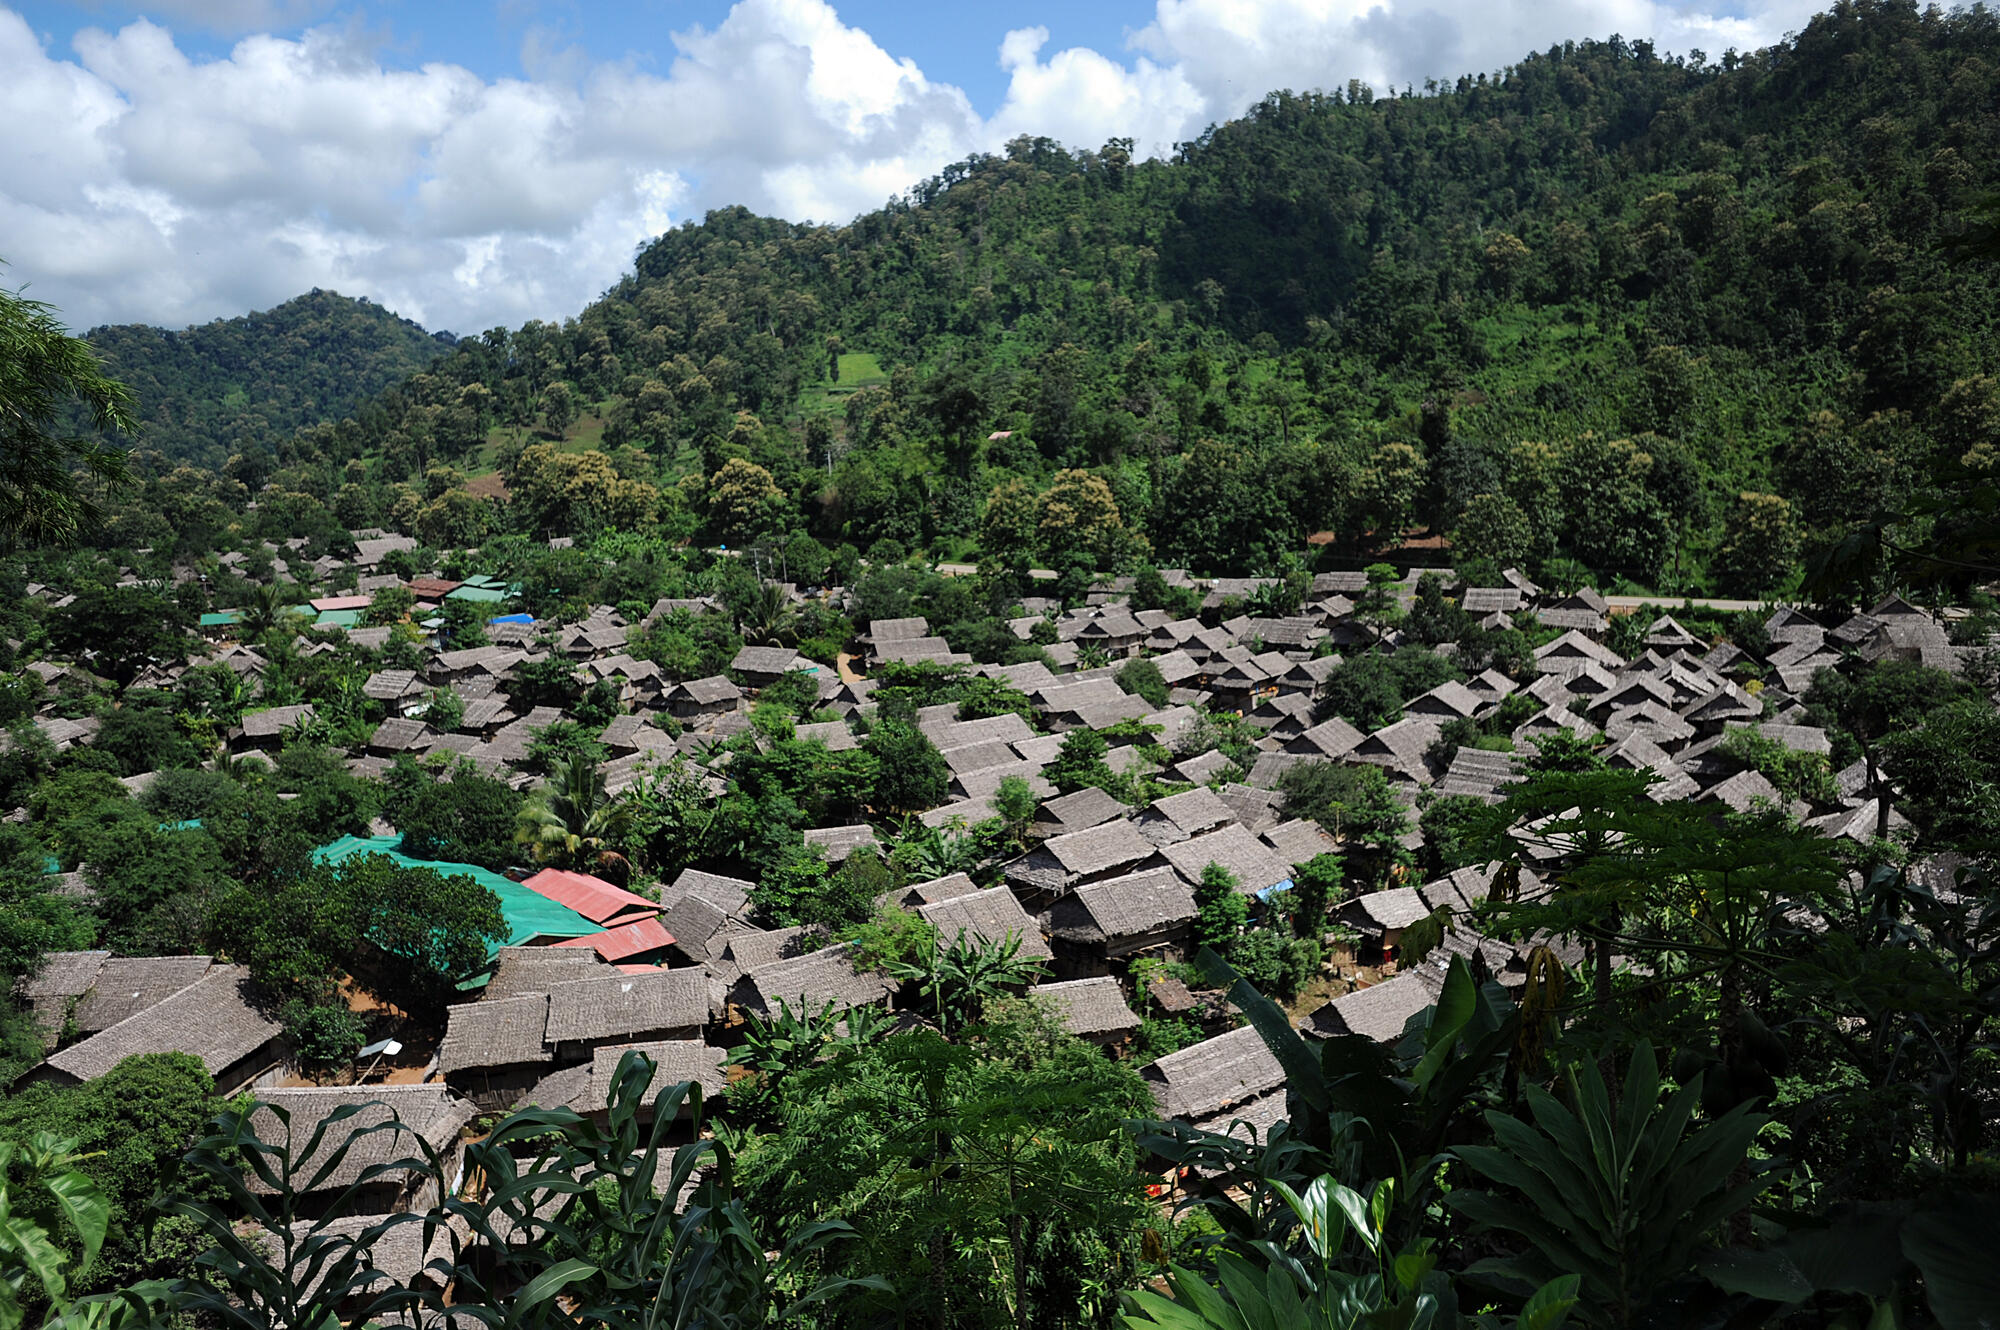 Mae La, with over 40,000 people, is the largest refugee camp along the Thailand-Myanmar border. 